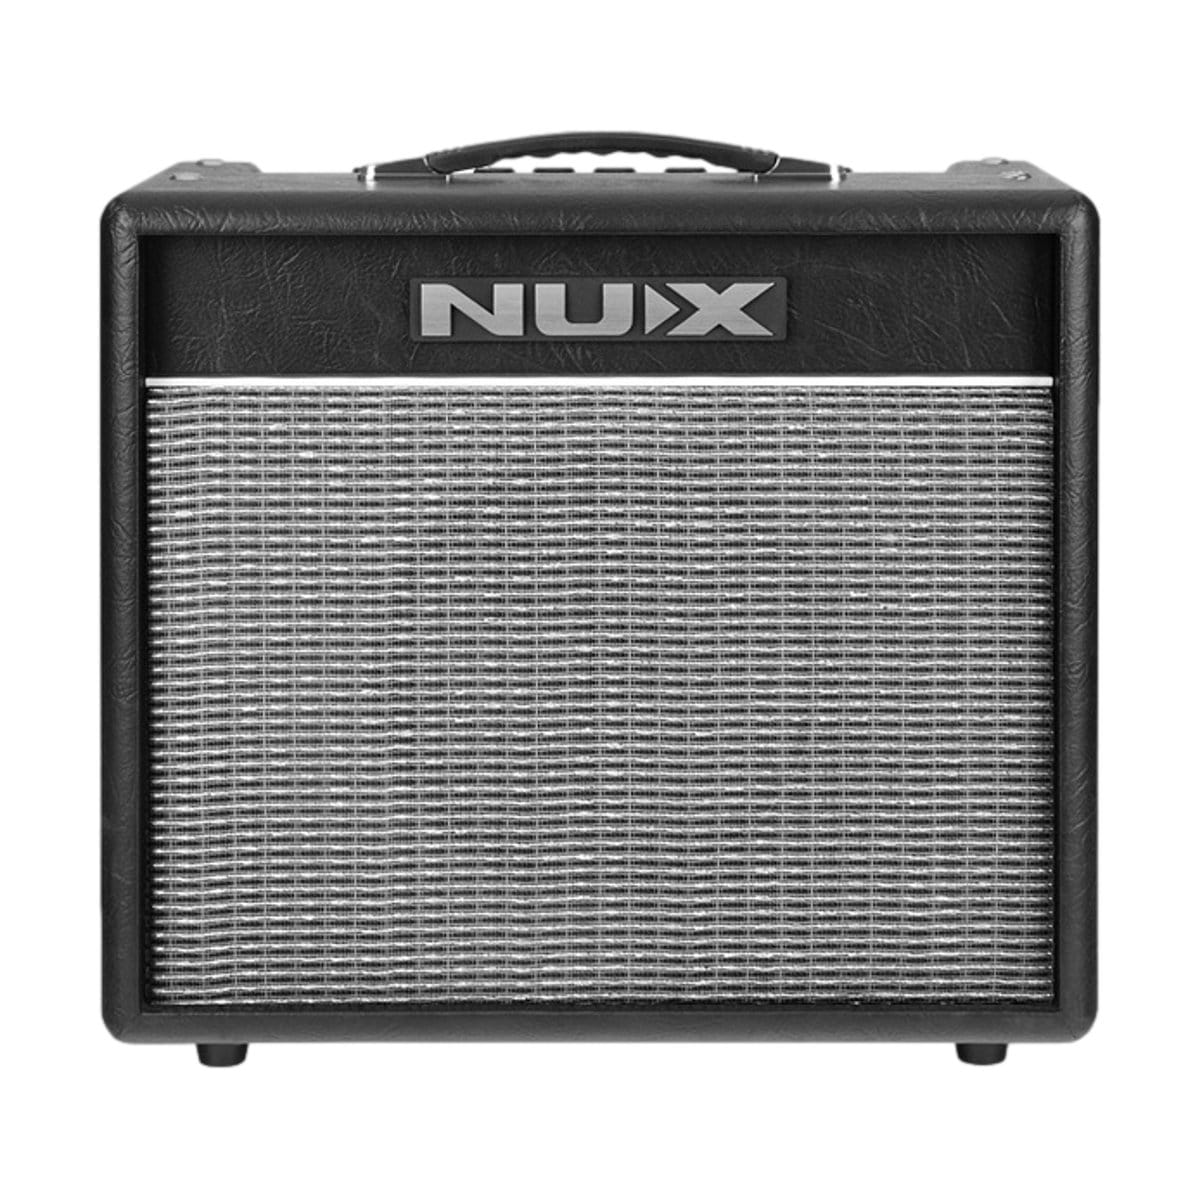 NUX Amps NUX Mighty 20 BT Guitar Amplifier with Effects - Byron Music